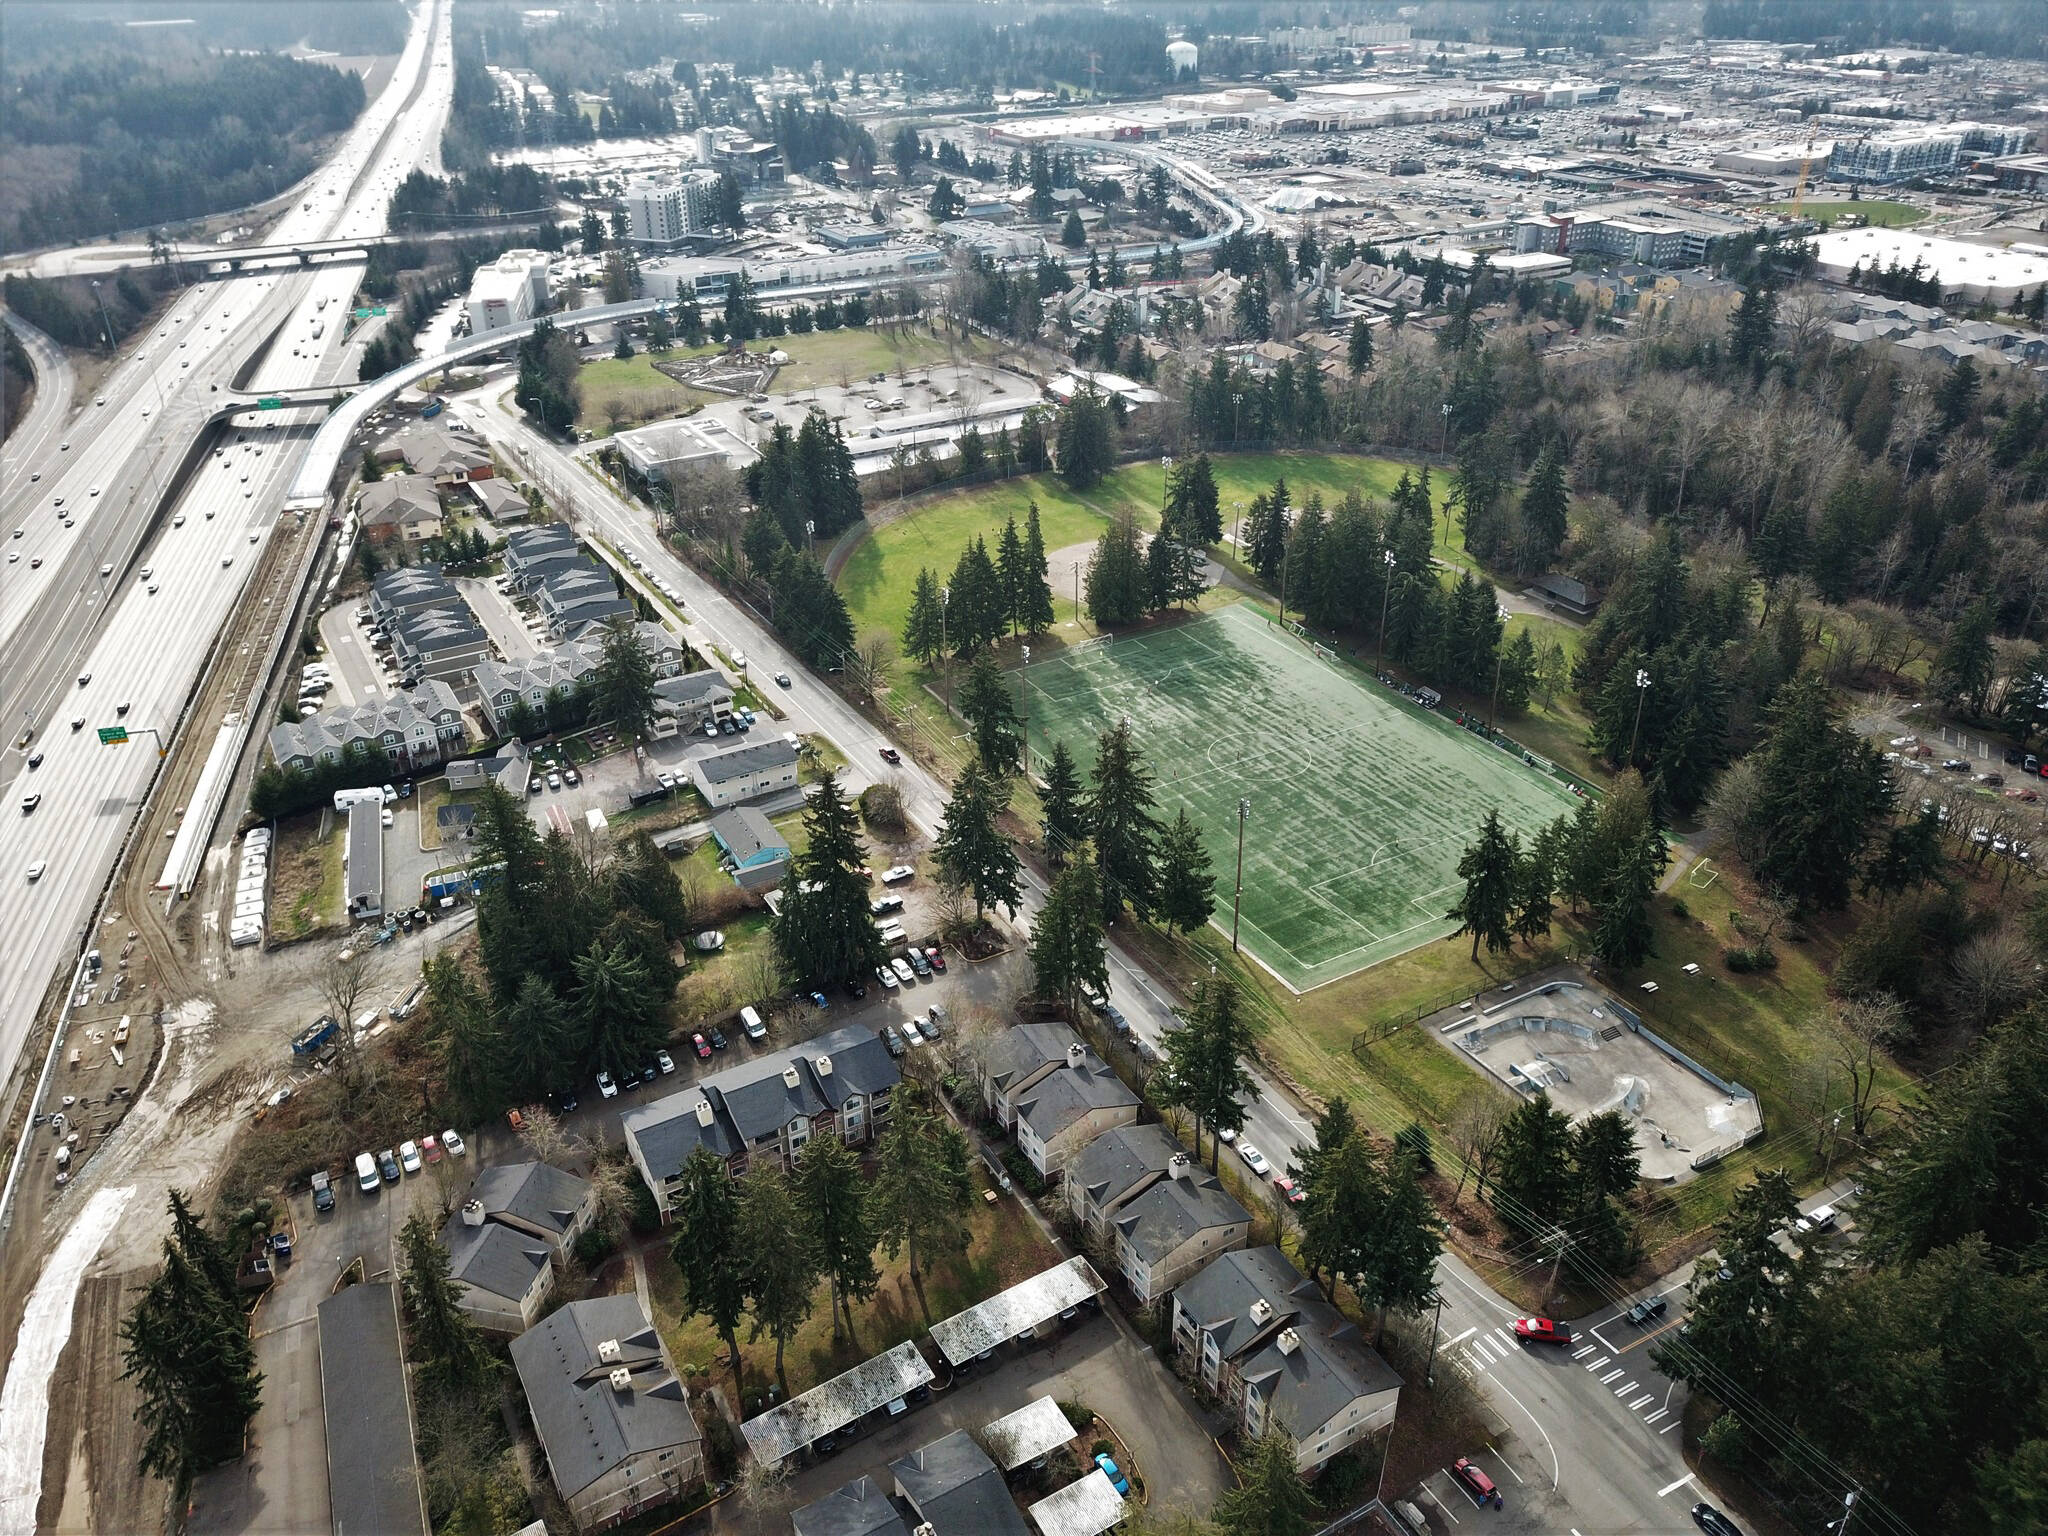 Aerial photo of the fields and skate park near Steel Lake. The Federal Way City Council is seeking to relocate the city’s maintenance facility and previously considered removing the two baseball fields and skate park, in order to create space for the facility. Photo courtesy of Bruce Honda